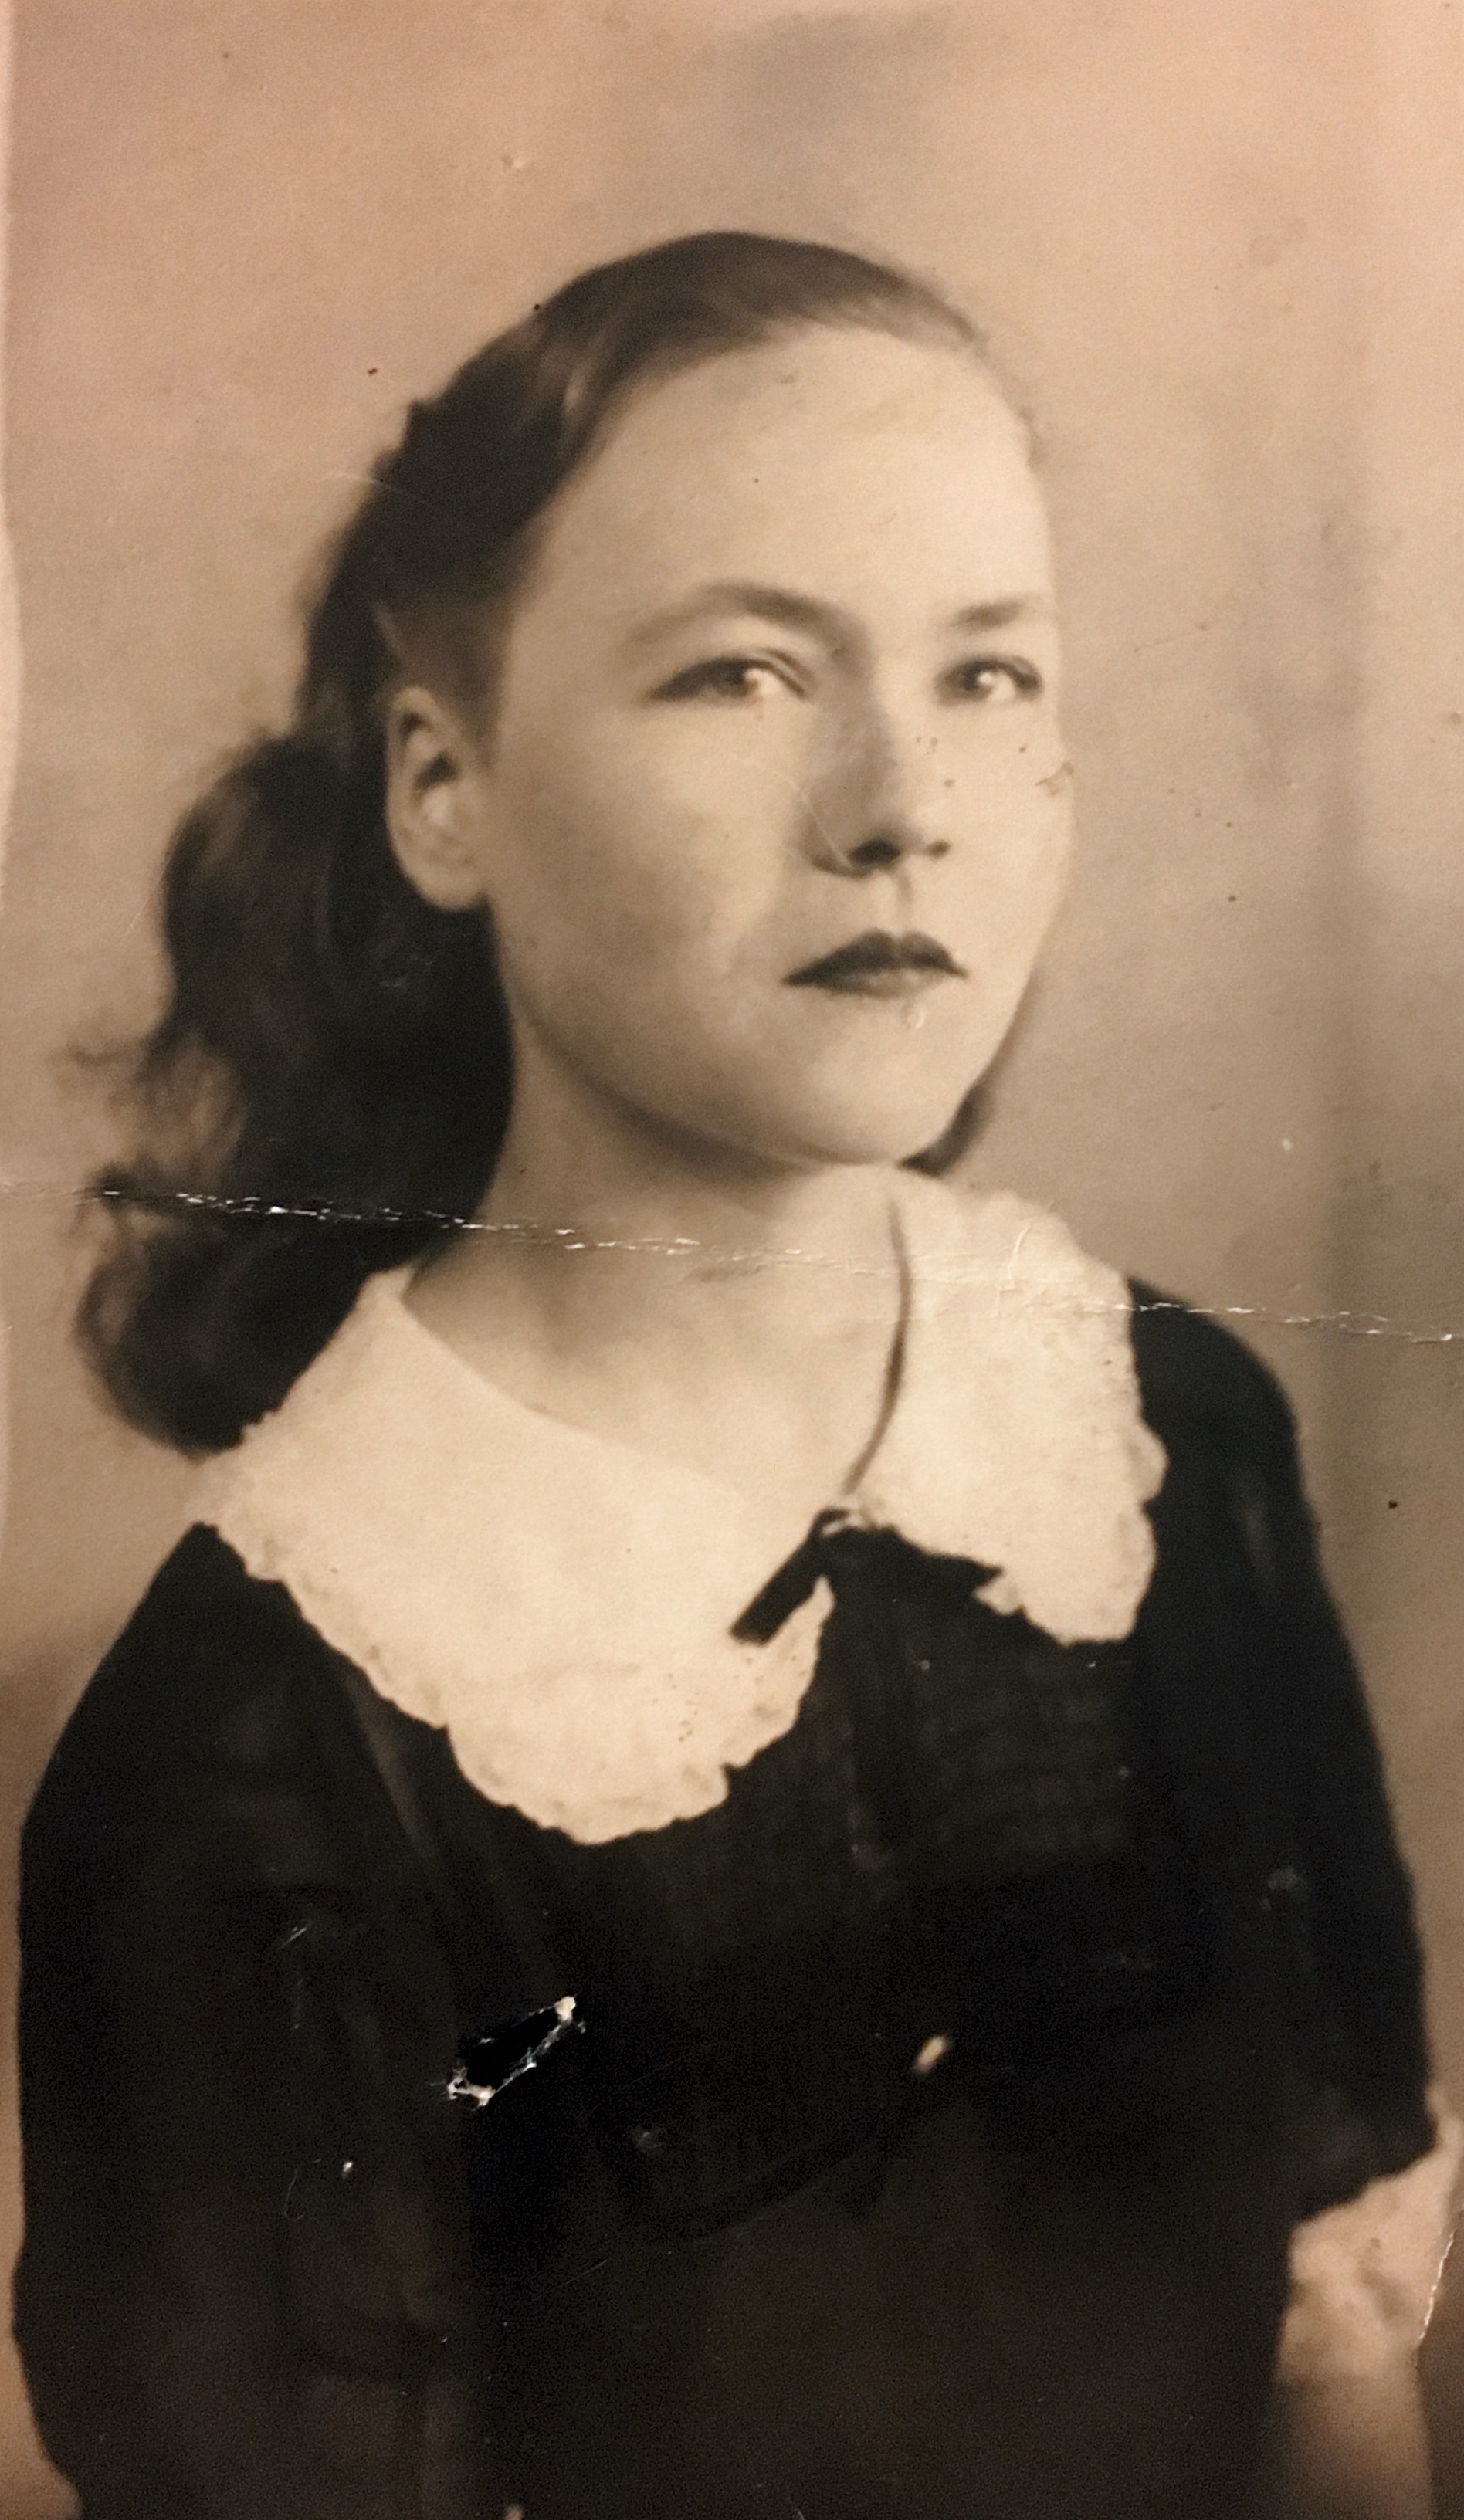 My Late Granny - Aged 19 3/4 - 1939